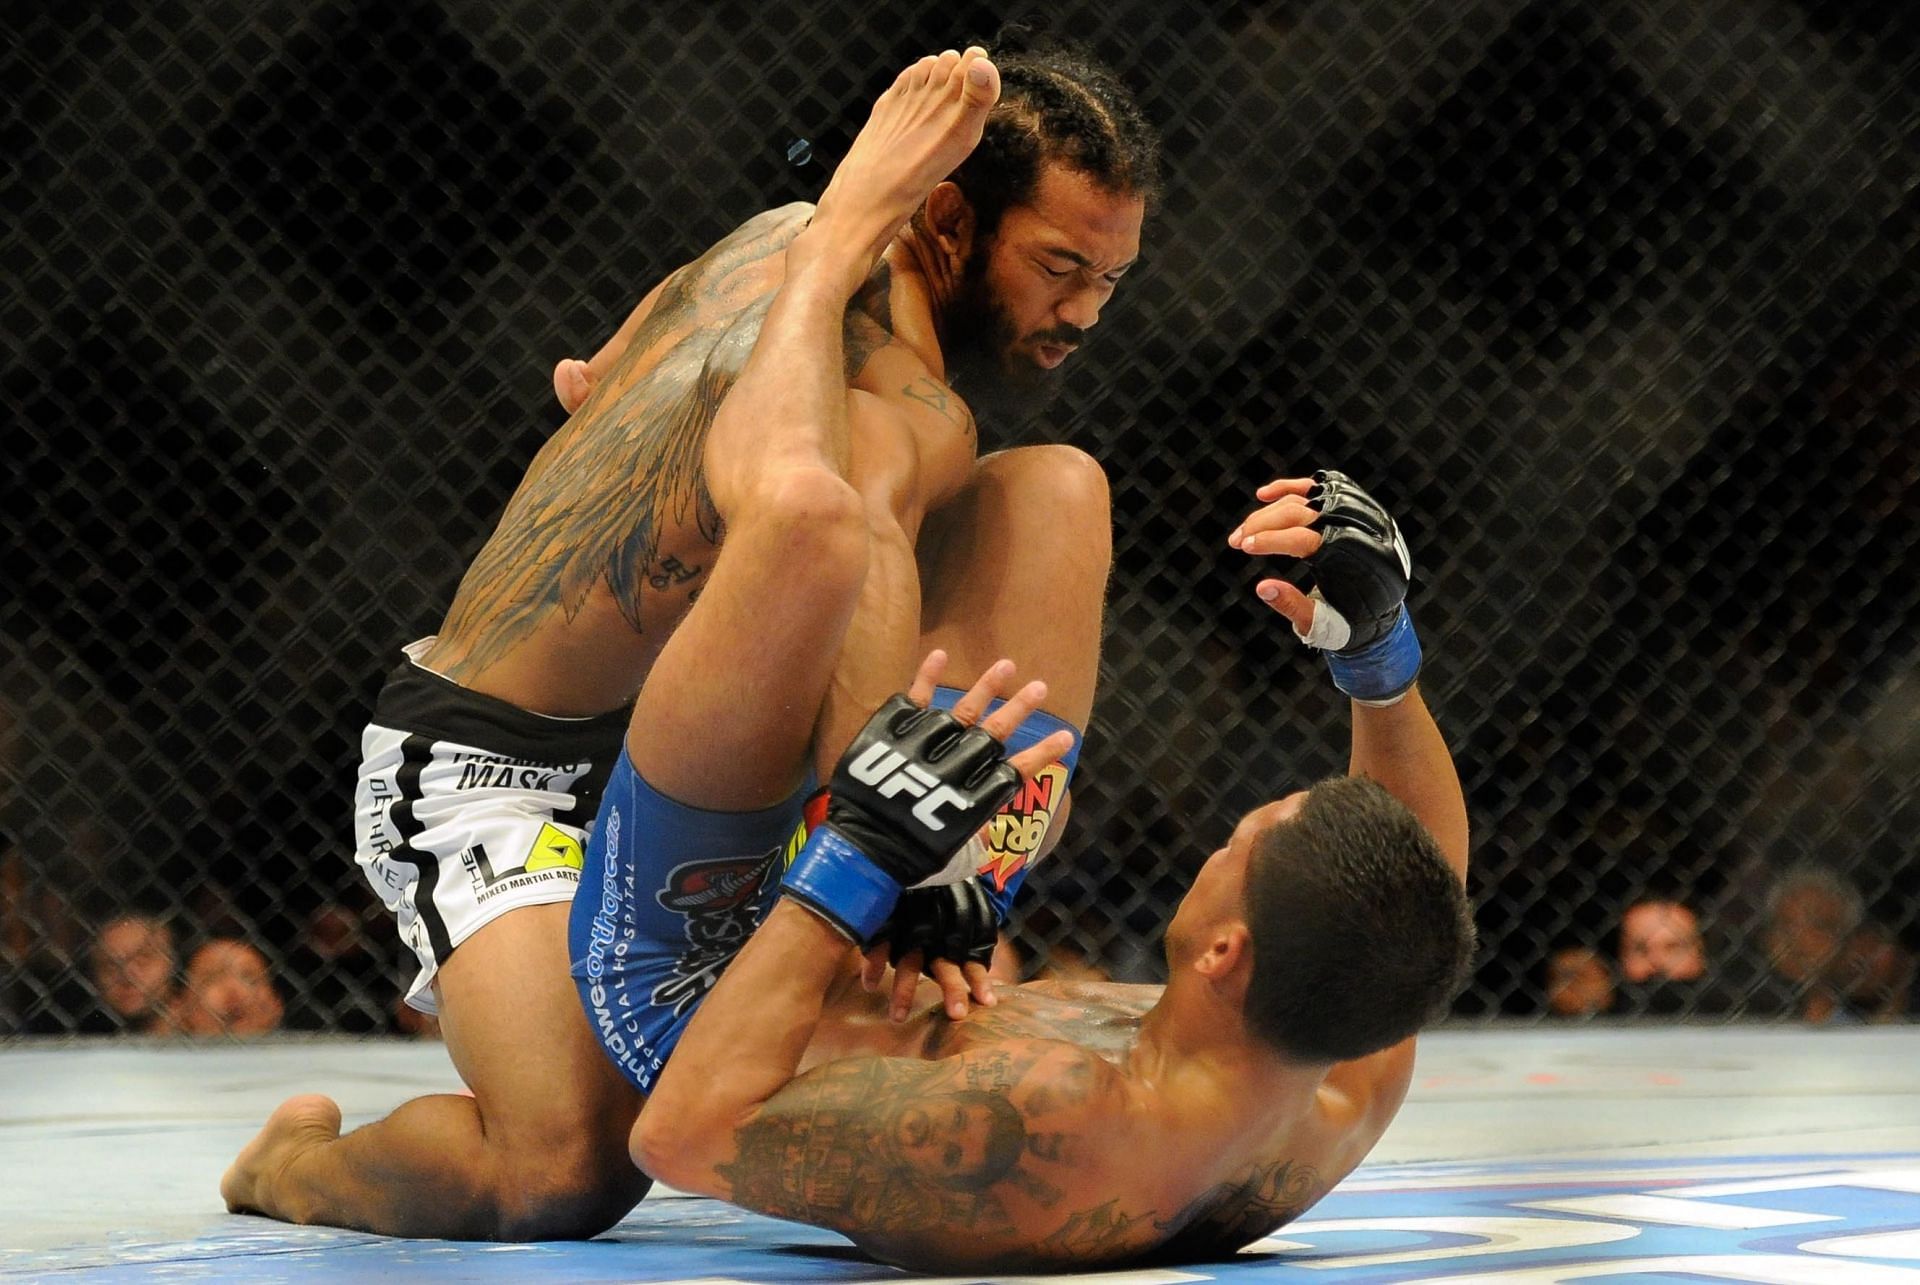 Anthony Pettis surprised everyone with his armbar finish of Benson Henderson